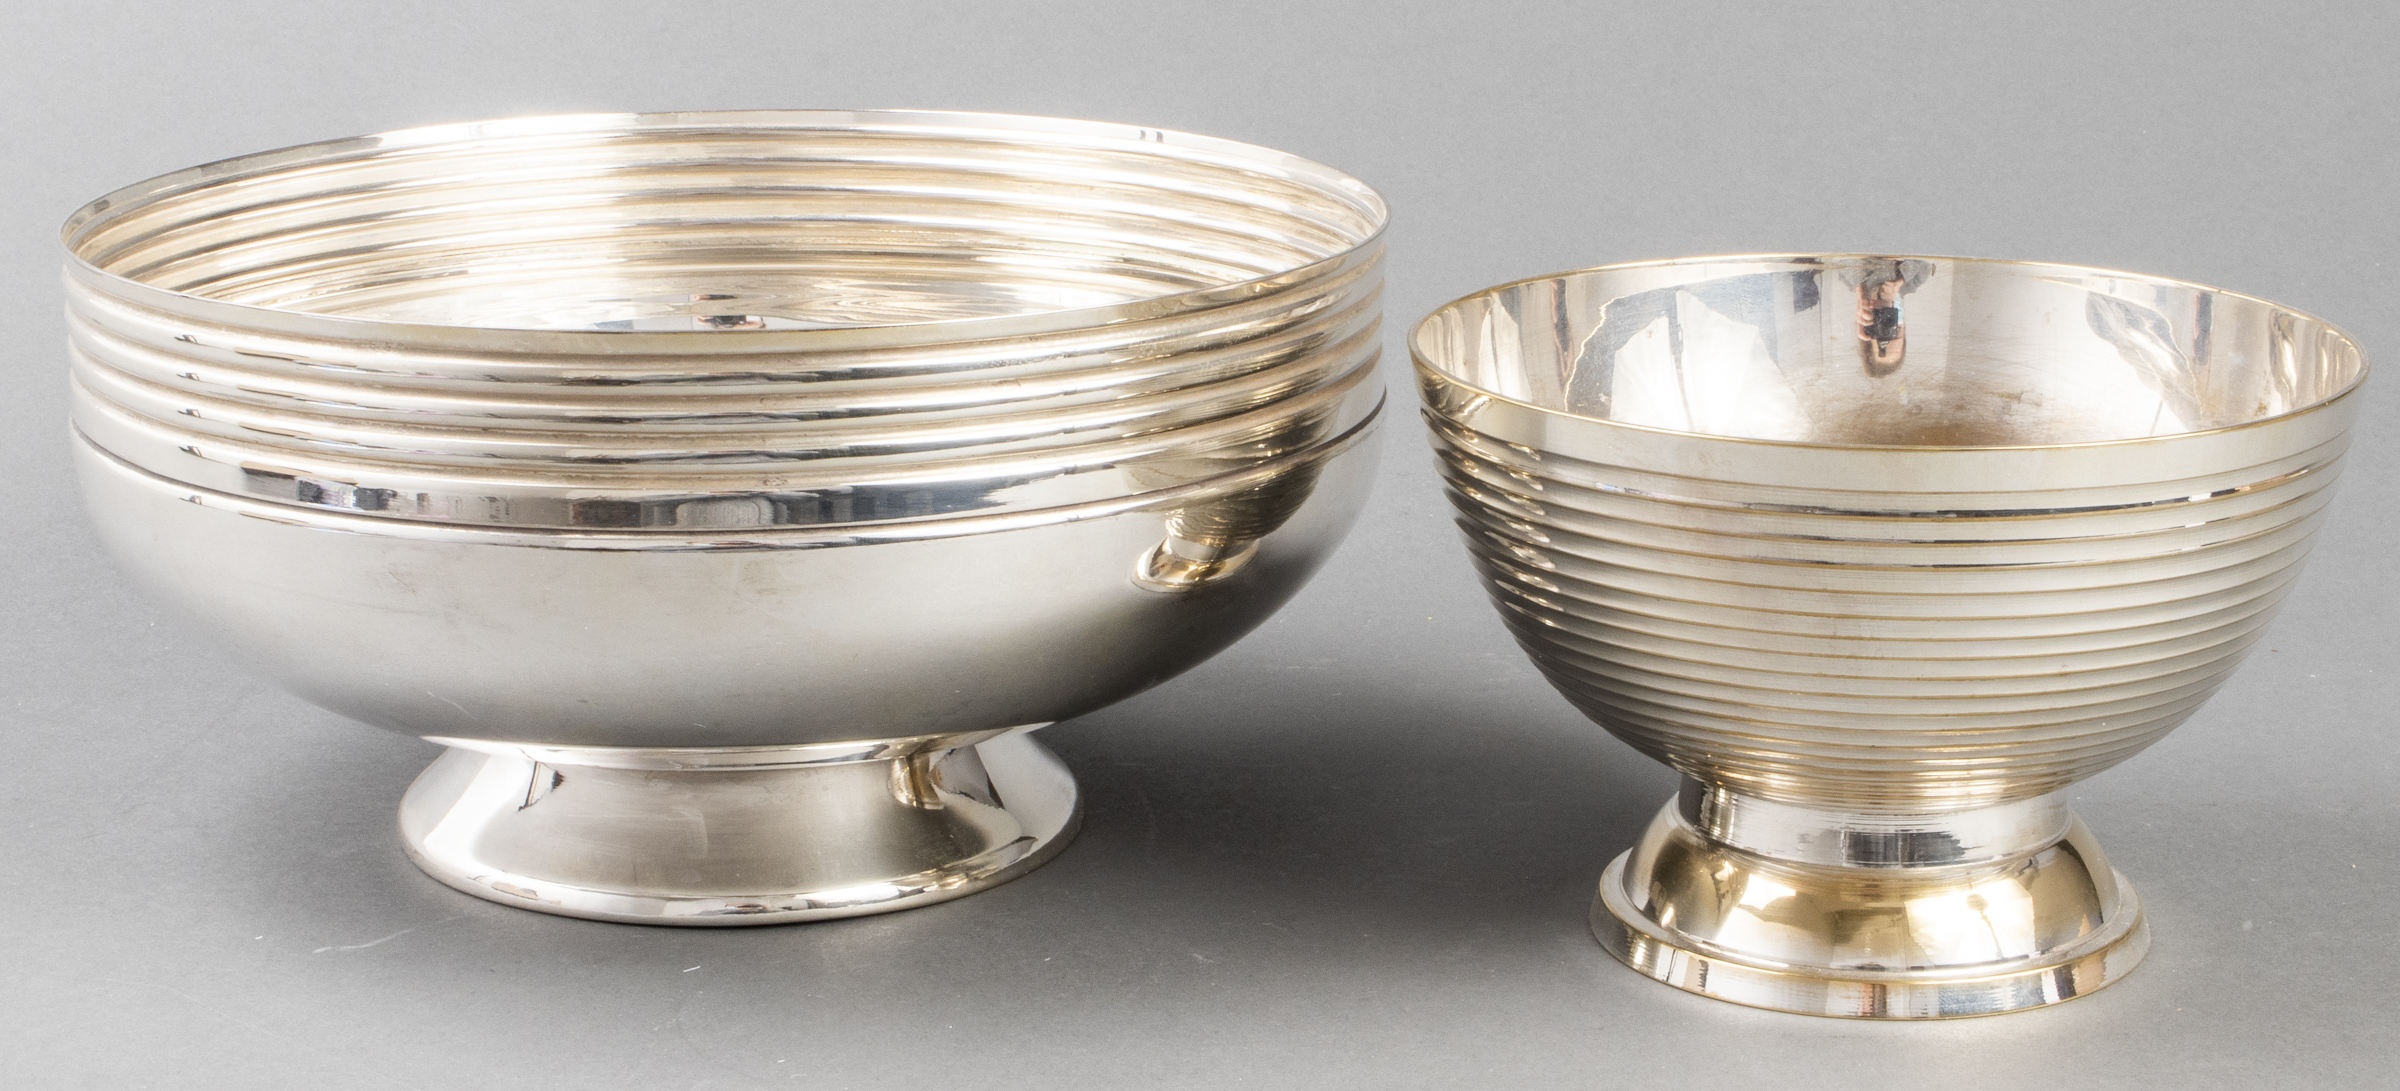 MODERN SILVERPLATE FOOTED BOWLS  3c3e62